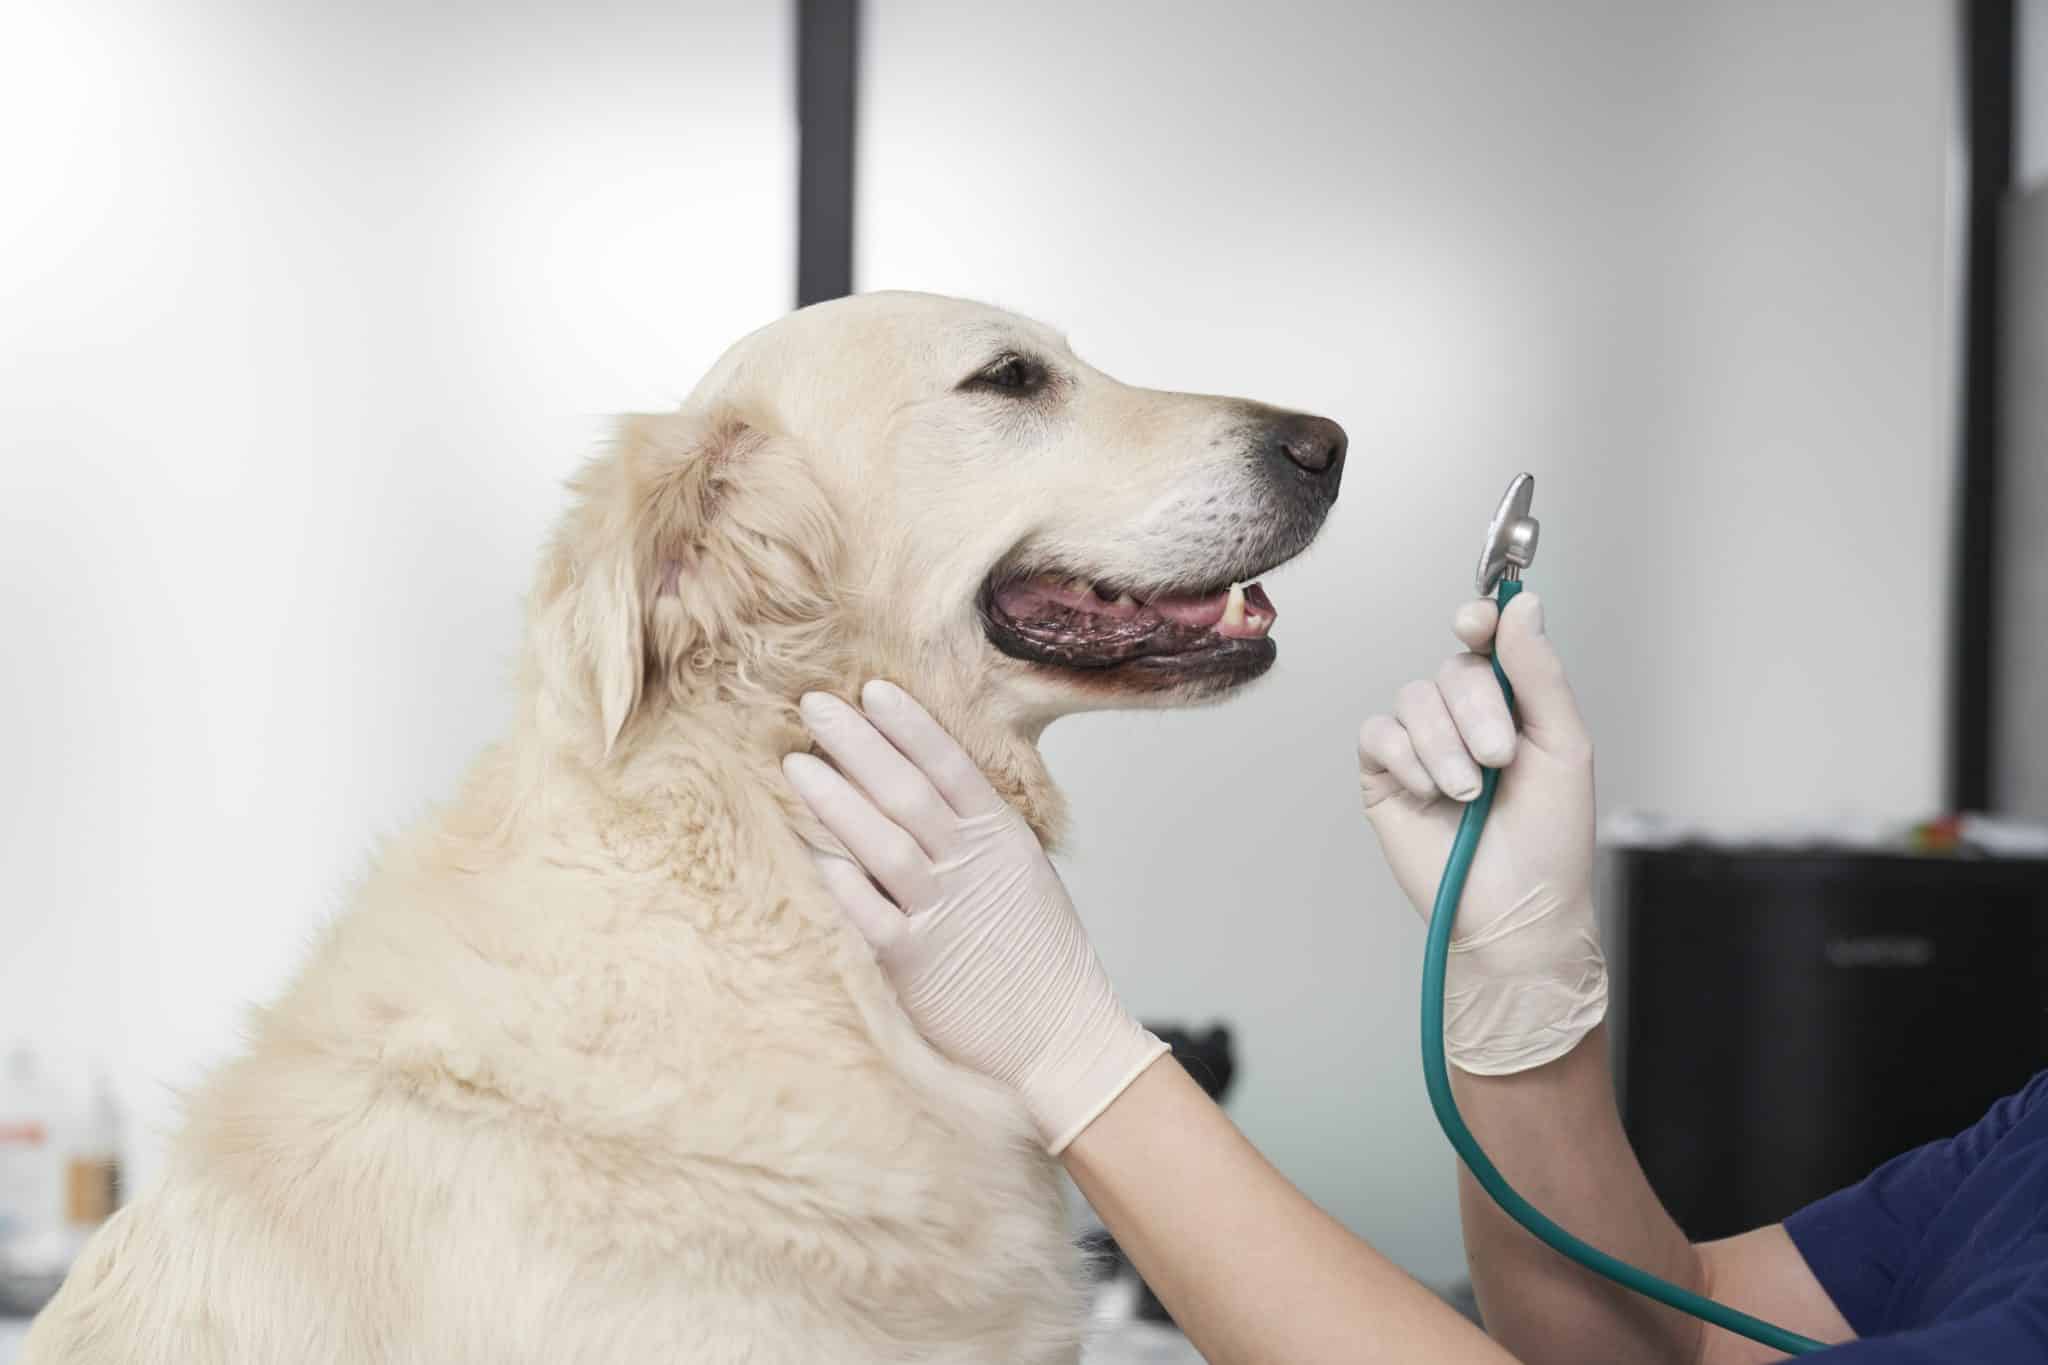 Vet examining a dog for skin conditions.